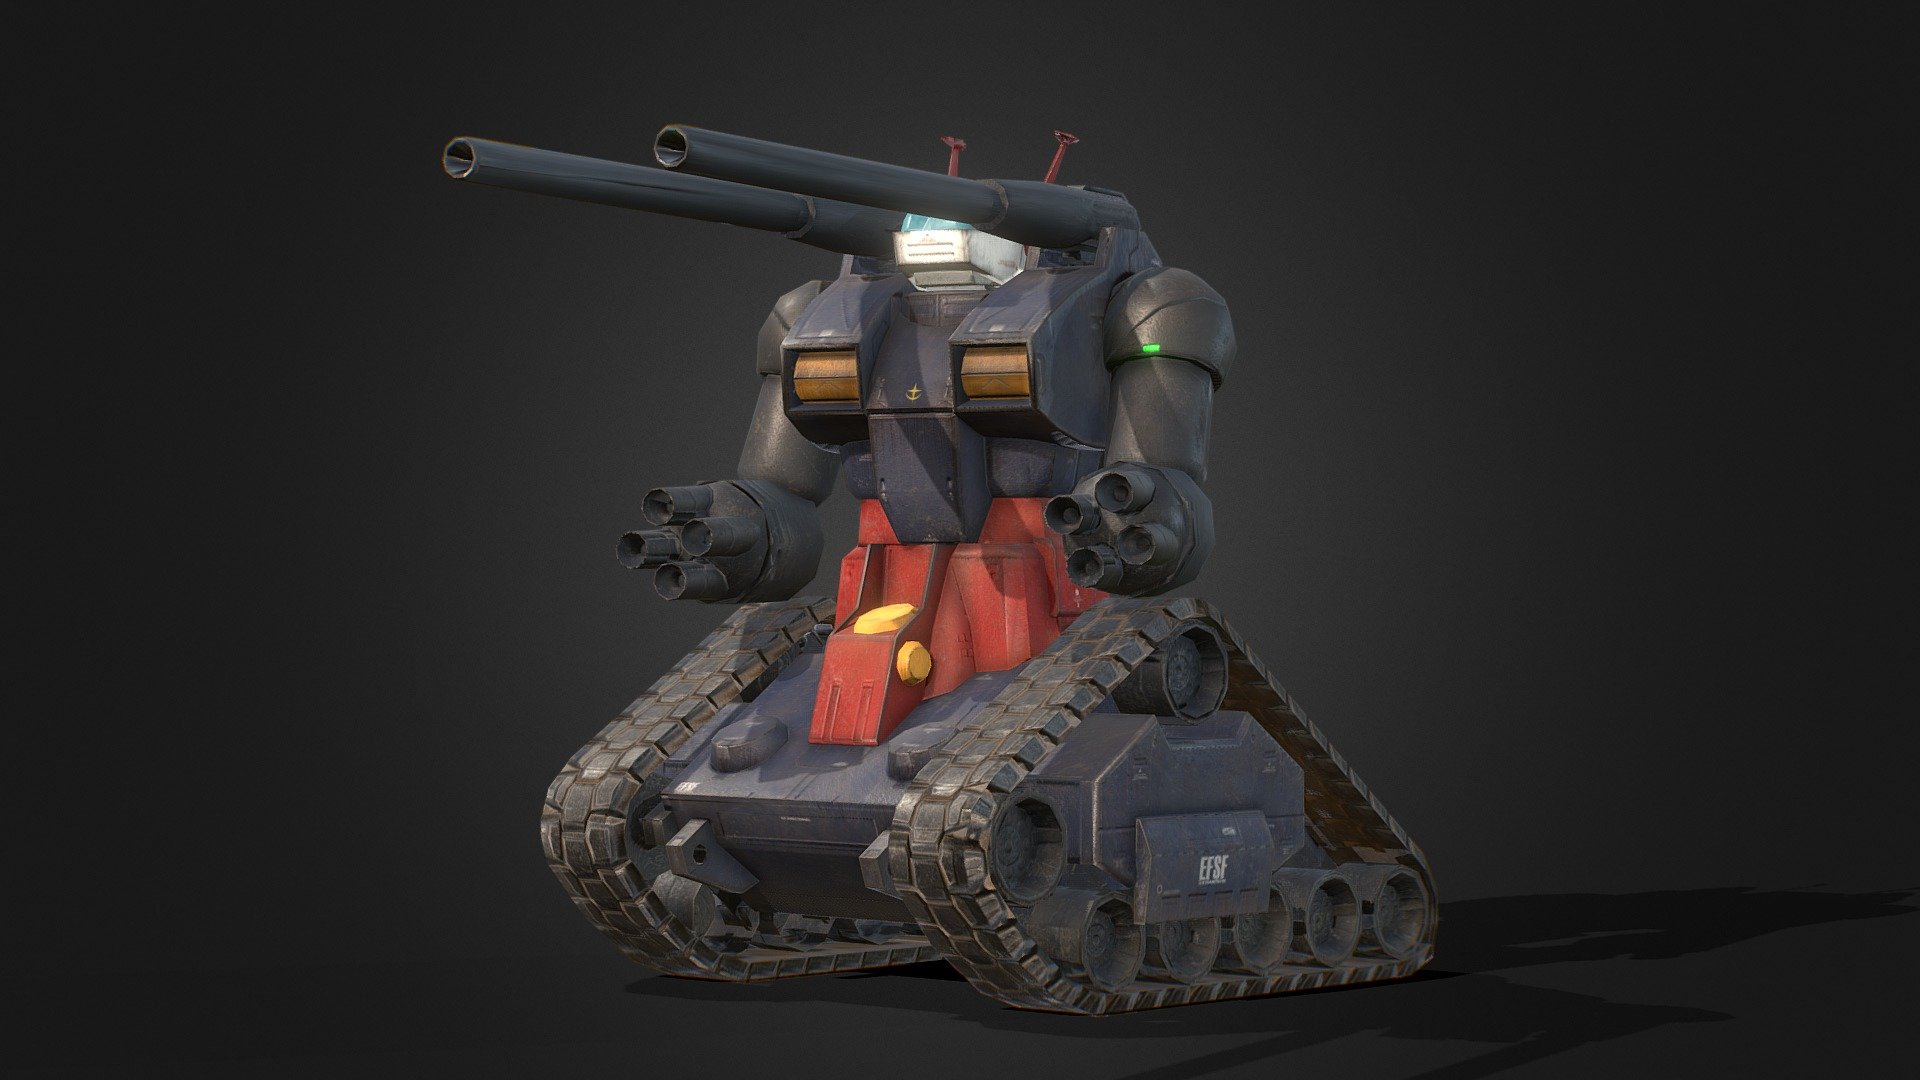 This model was made for One Year War mod of Hearts of Iron IV.

Our Mod Steam Home Page

https://steamcommunity.com/sharedfiles/filedetails/?id=2064985570 - RX-75 Guntank - 3D model by One Year War Mod (@hoi4oneyearwar) 3d model